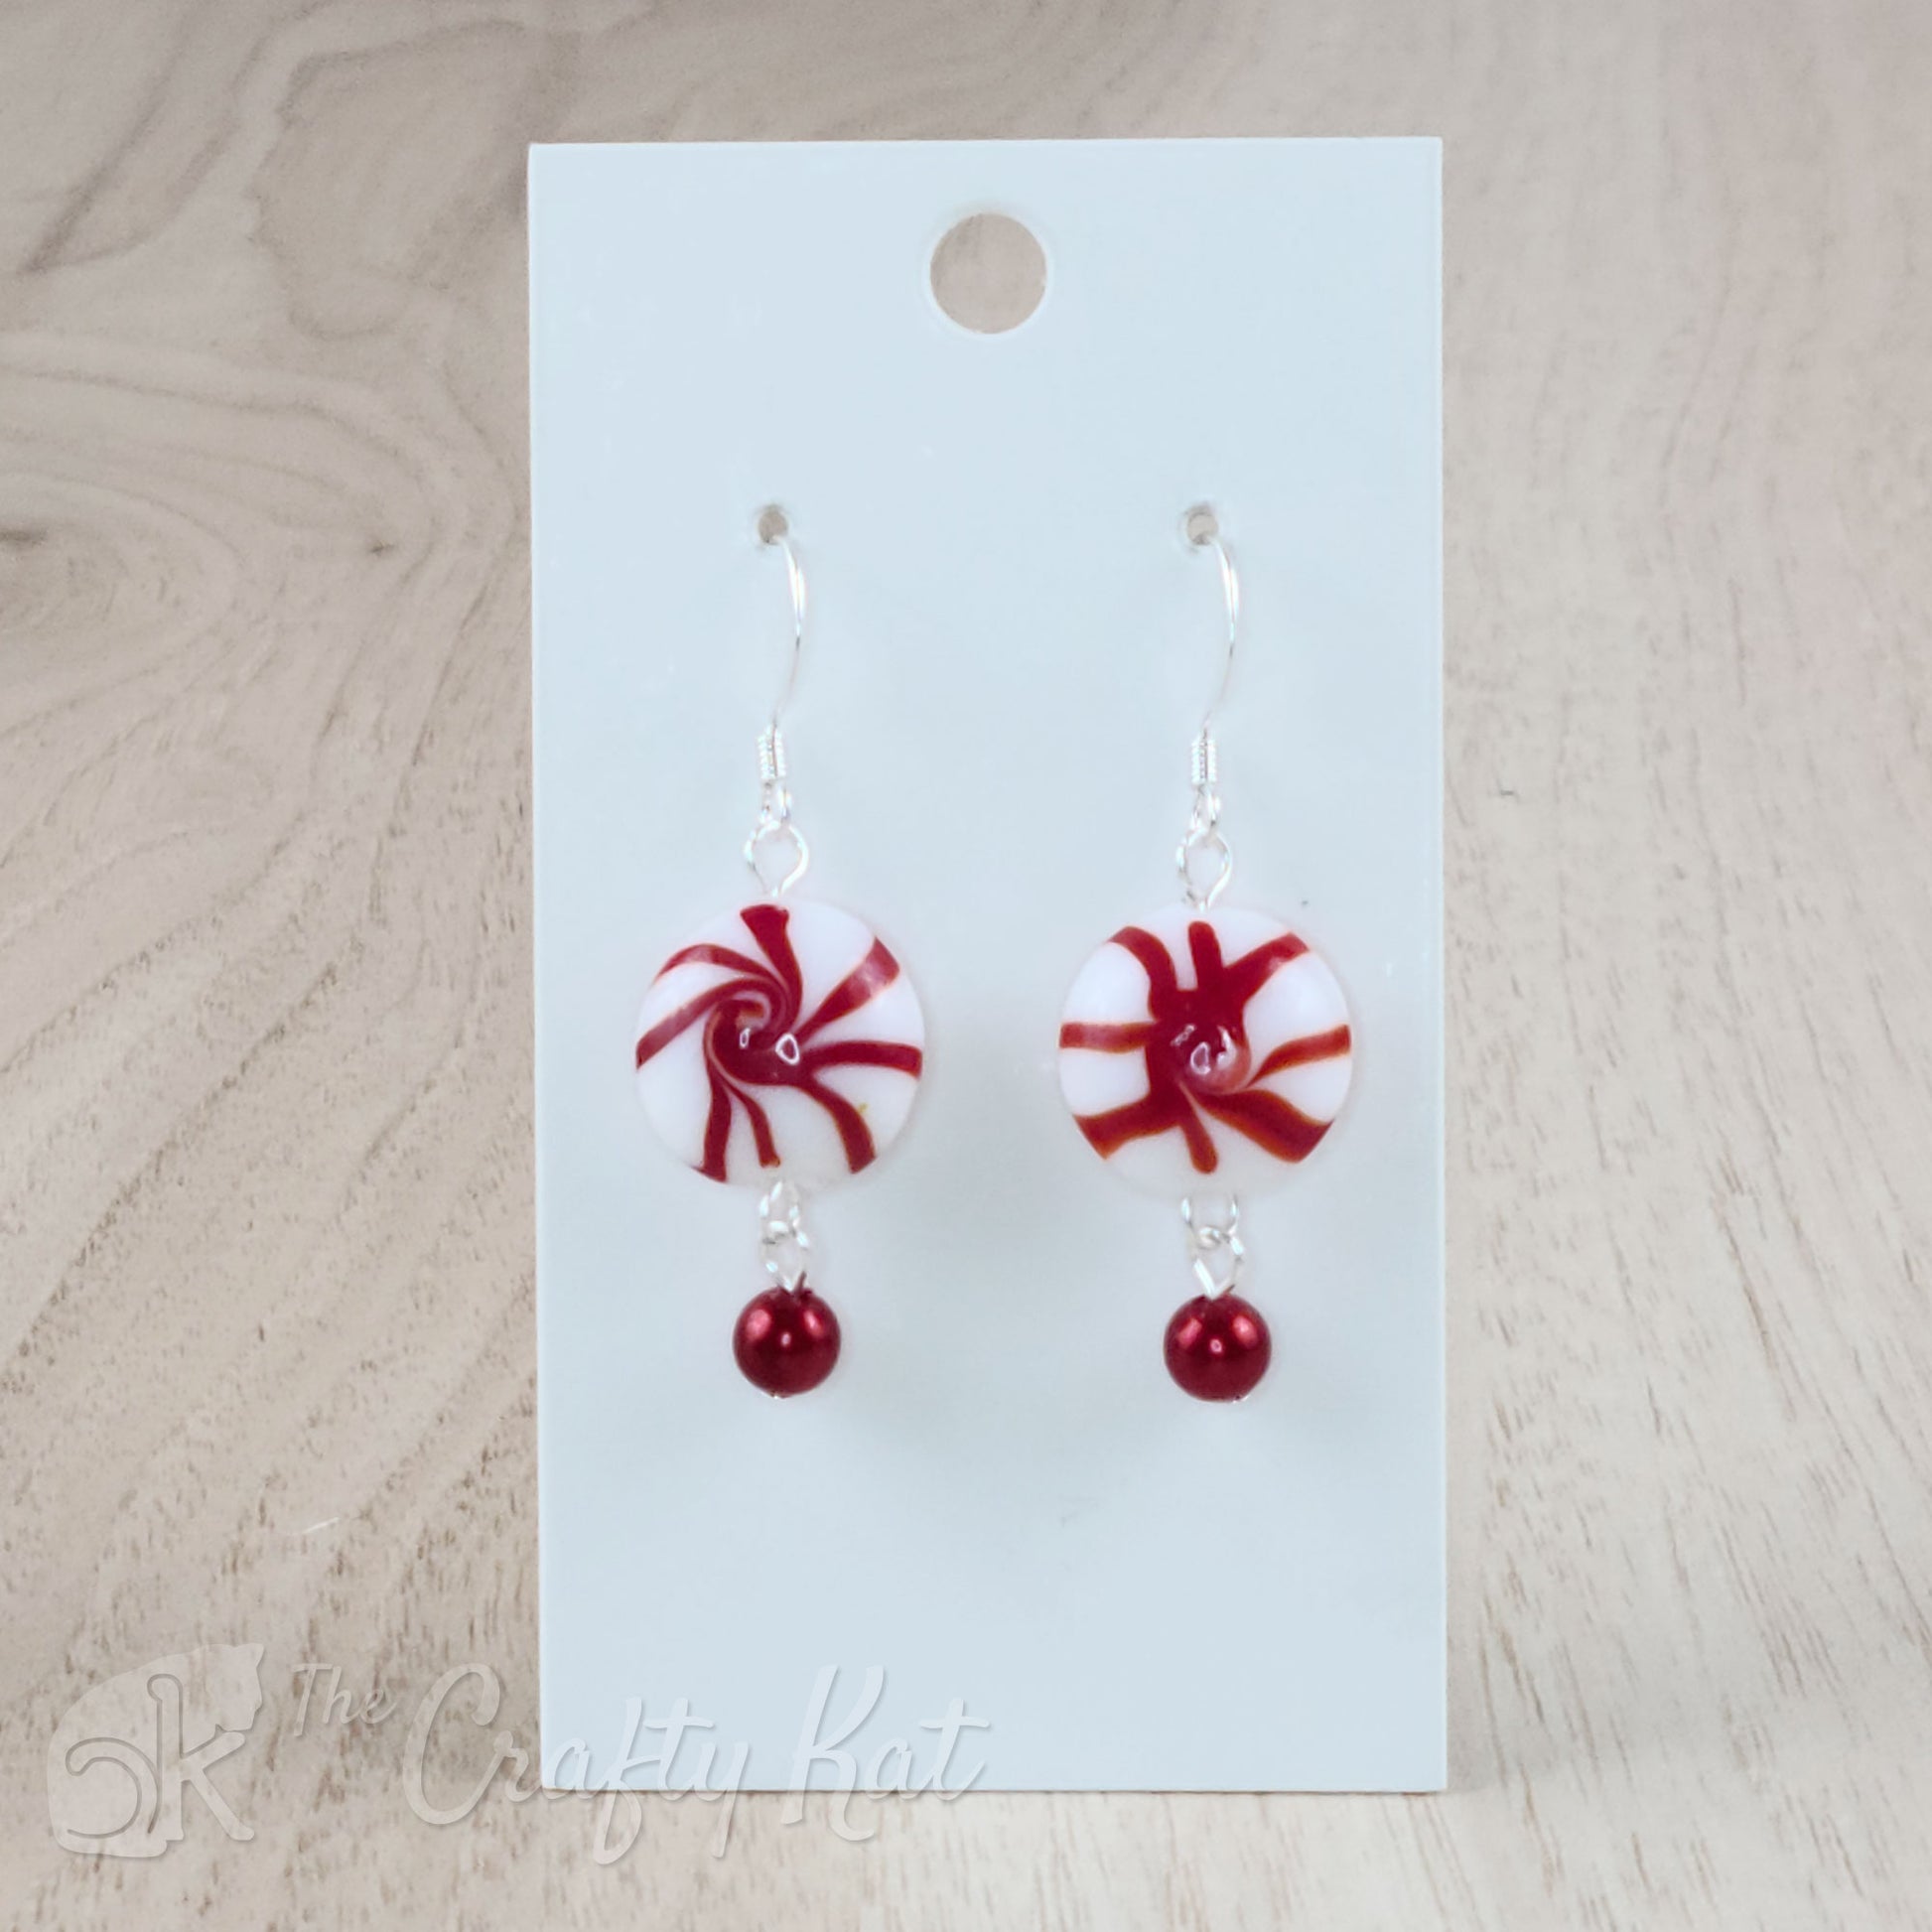 A pair of earrings featuring lampwork glass beads in the shape of classic "starlight" peppermint candies, accented with a red glass pearl on silver base metal.